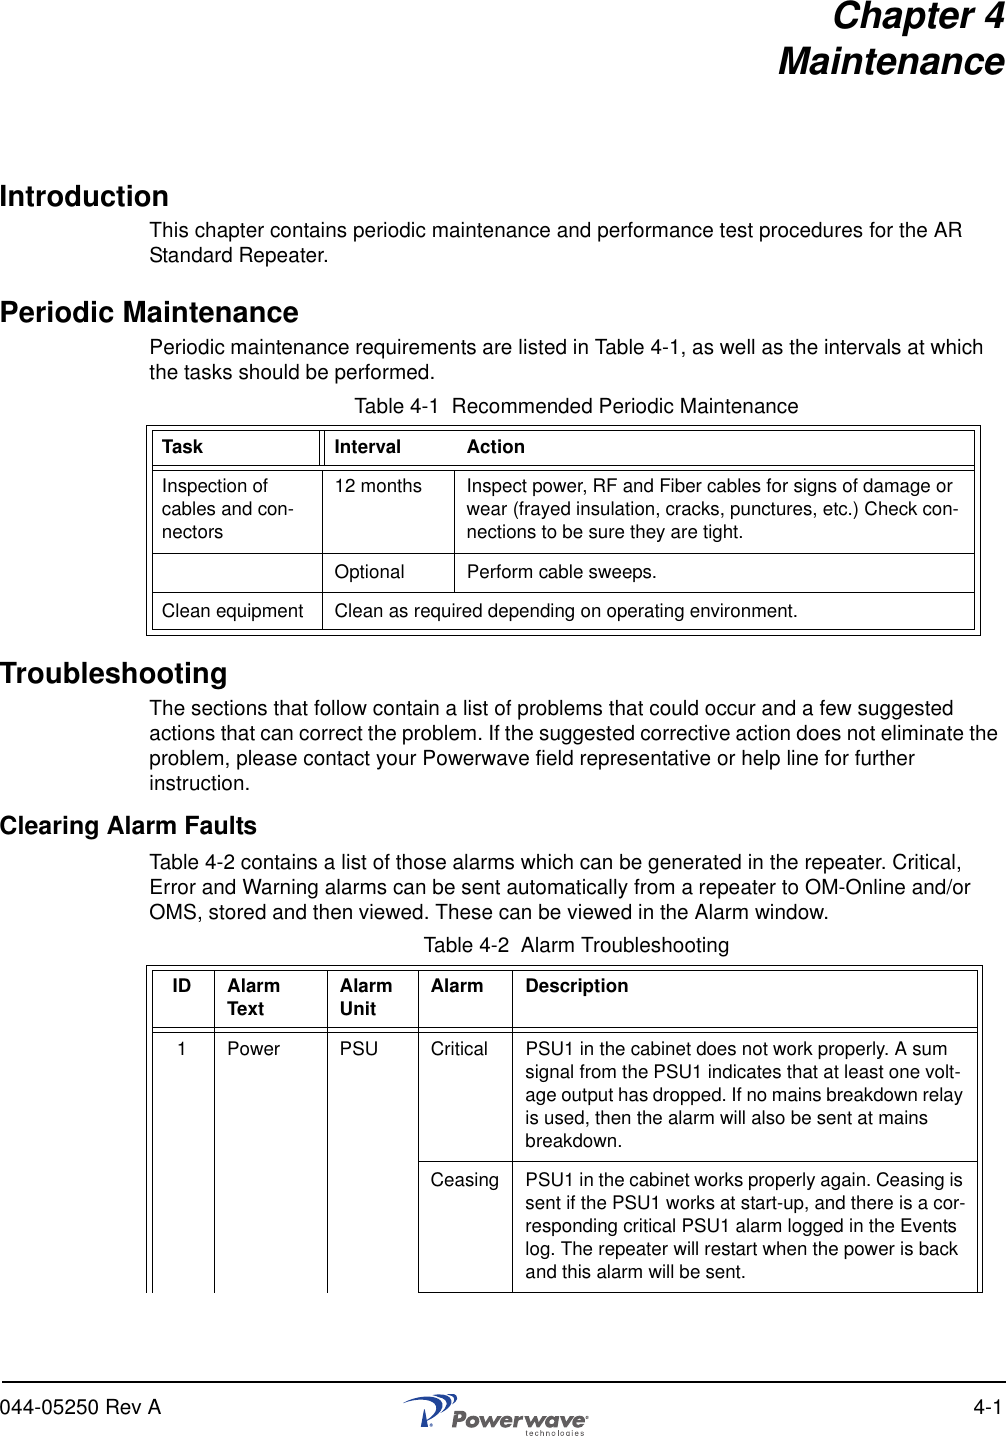 044-05250 Rev A 4-1Chapter 4MaintenanceIntroductionThis chapter contains periodic maintenance and performance test procedures for the AR Standard Repeater.Periodic MaintenancePeriodic maintenance requirements are listed in Table 4-1, as well as the intervals at which the tasks should be performed.Table 4-1  Recommended Periodic MaintenanceTroubleshootingThe sections that follow contain a list of problems that could occur and a few suggested actions that can correct the problem. If the suggested corrective action does not eliminate the problem, please contact your Powerwave field representative or help line for further instruction.Clearing Alarm FaultsTable 4-2 contains a list of those alarms which can be generated in the repeater. Critical, Error and Warning alarms can be sent automatically from a repeater to OM-Online and/or OMS, stored and then viewed. These can be viewed in the Alarm window.Table 4-2  Alarm TroubleshootingTask Interval ActionInspection of cables and con-nectors12 months Inspect power, RF and Fiber cables for signs of damage or wear (frayed insulation, cracks, punctures, etc.) Check con-nections to be sure they are tight.Optional Perform cable sweeps.Clean equipment Clean as required depending on operating environment.ID Alarm Text Alarm Unit Alarm Description1 Power PSU Critical PSU1 in the cabinet does not work properly. A sum signal from the PSU1 indicates that at least one volt-age output has dropped. If no mains breakdown relay is used, then the alarm will also be sent at mains breakdown.Ceasing PSU1 in the cabinet works properly again. Ceasing is sent if the PSU1 works at start-up, and there is a cor-responding critical PSU1 alarm logged in the Events log. The repeater will restart when the power is back and this alarm will be sent.